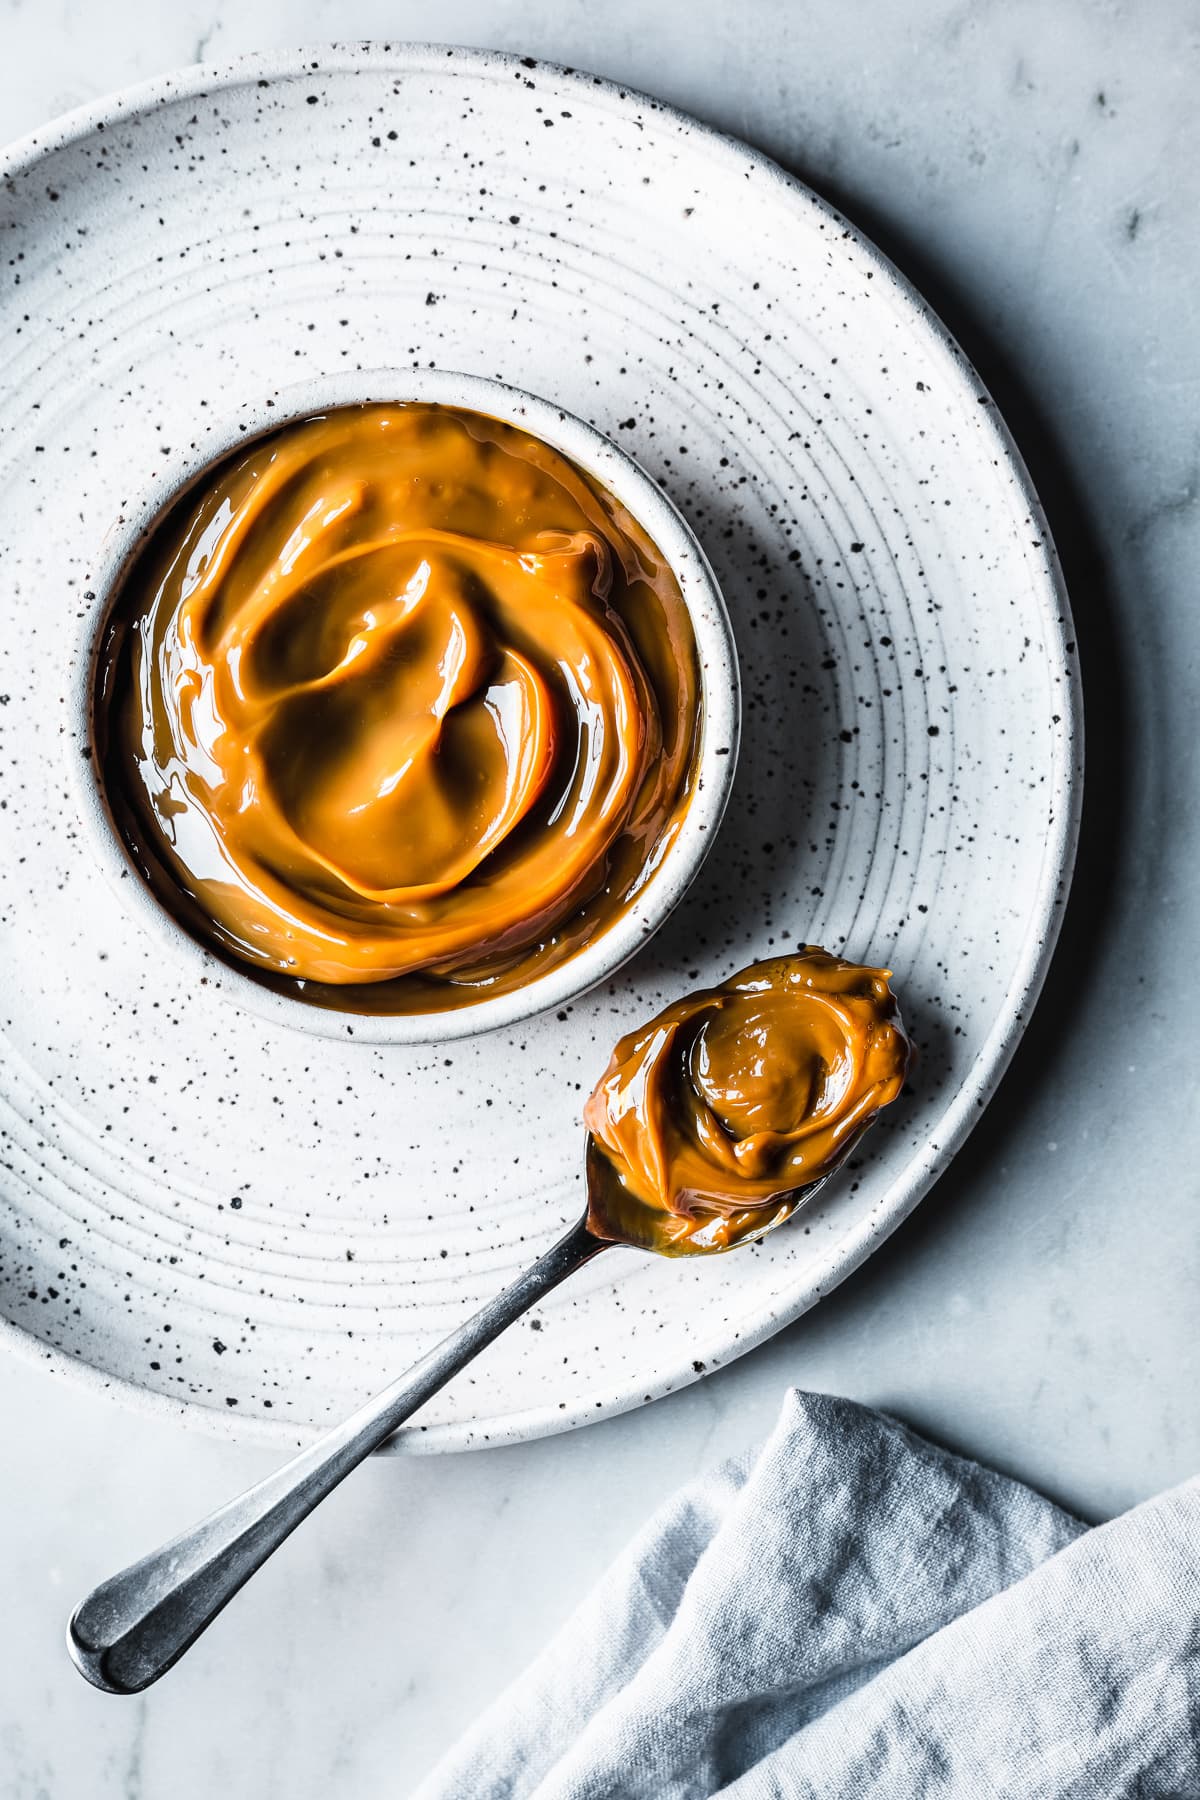 A white ceramic bowl with milk caramel sauce on a white speckled ceramic plate on a grey marble surface. A spoon holds a scoop of dulce de leche. A light blue linen napkin peeks into the bottom of the photo.